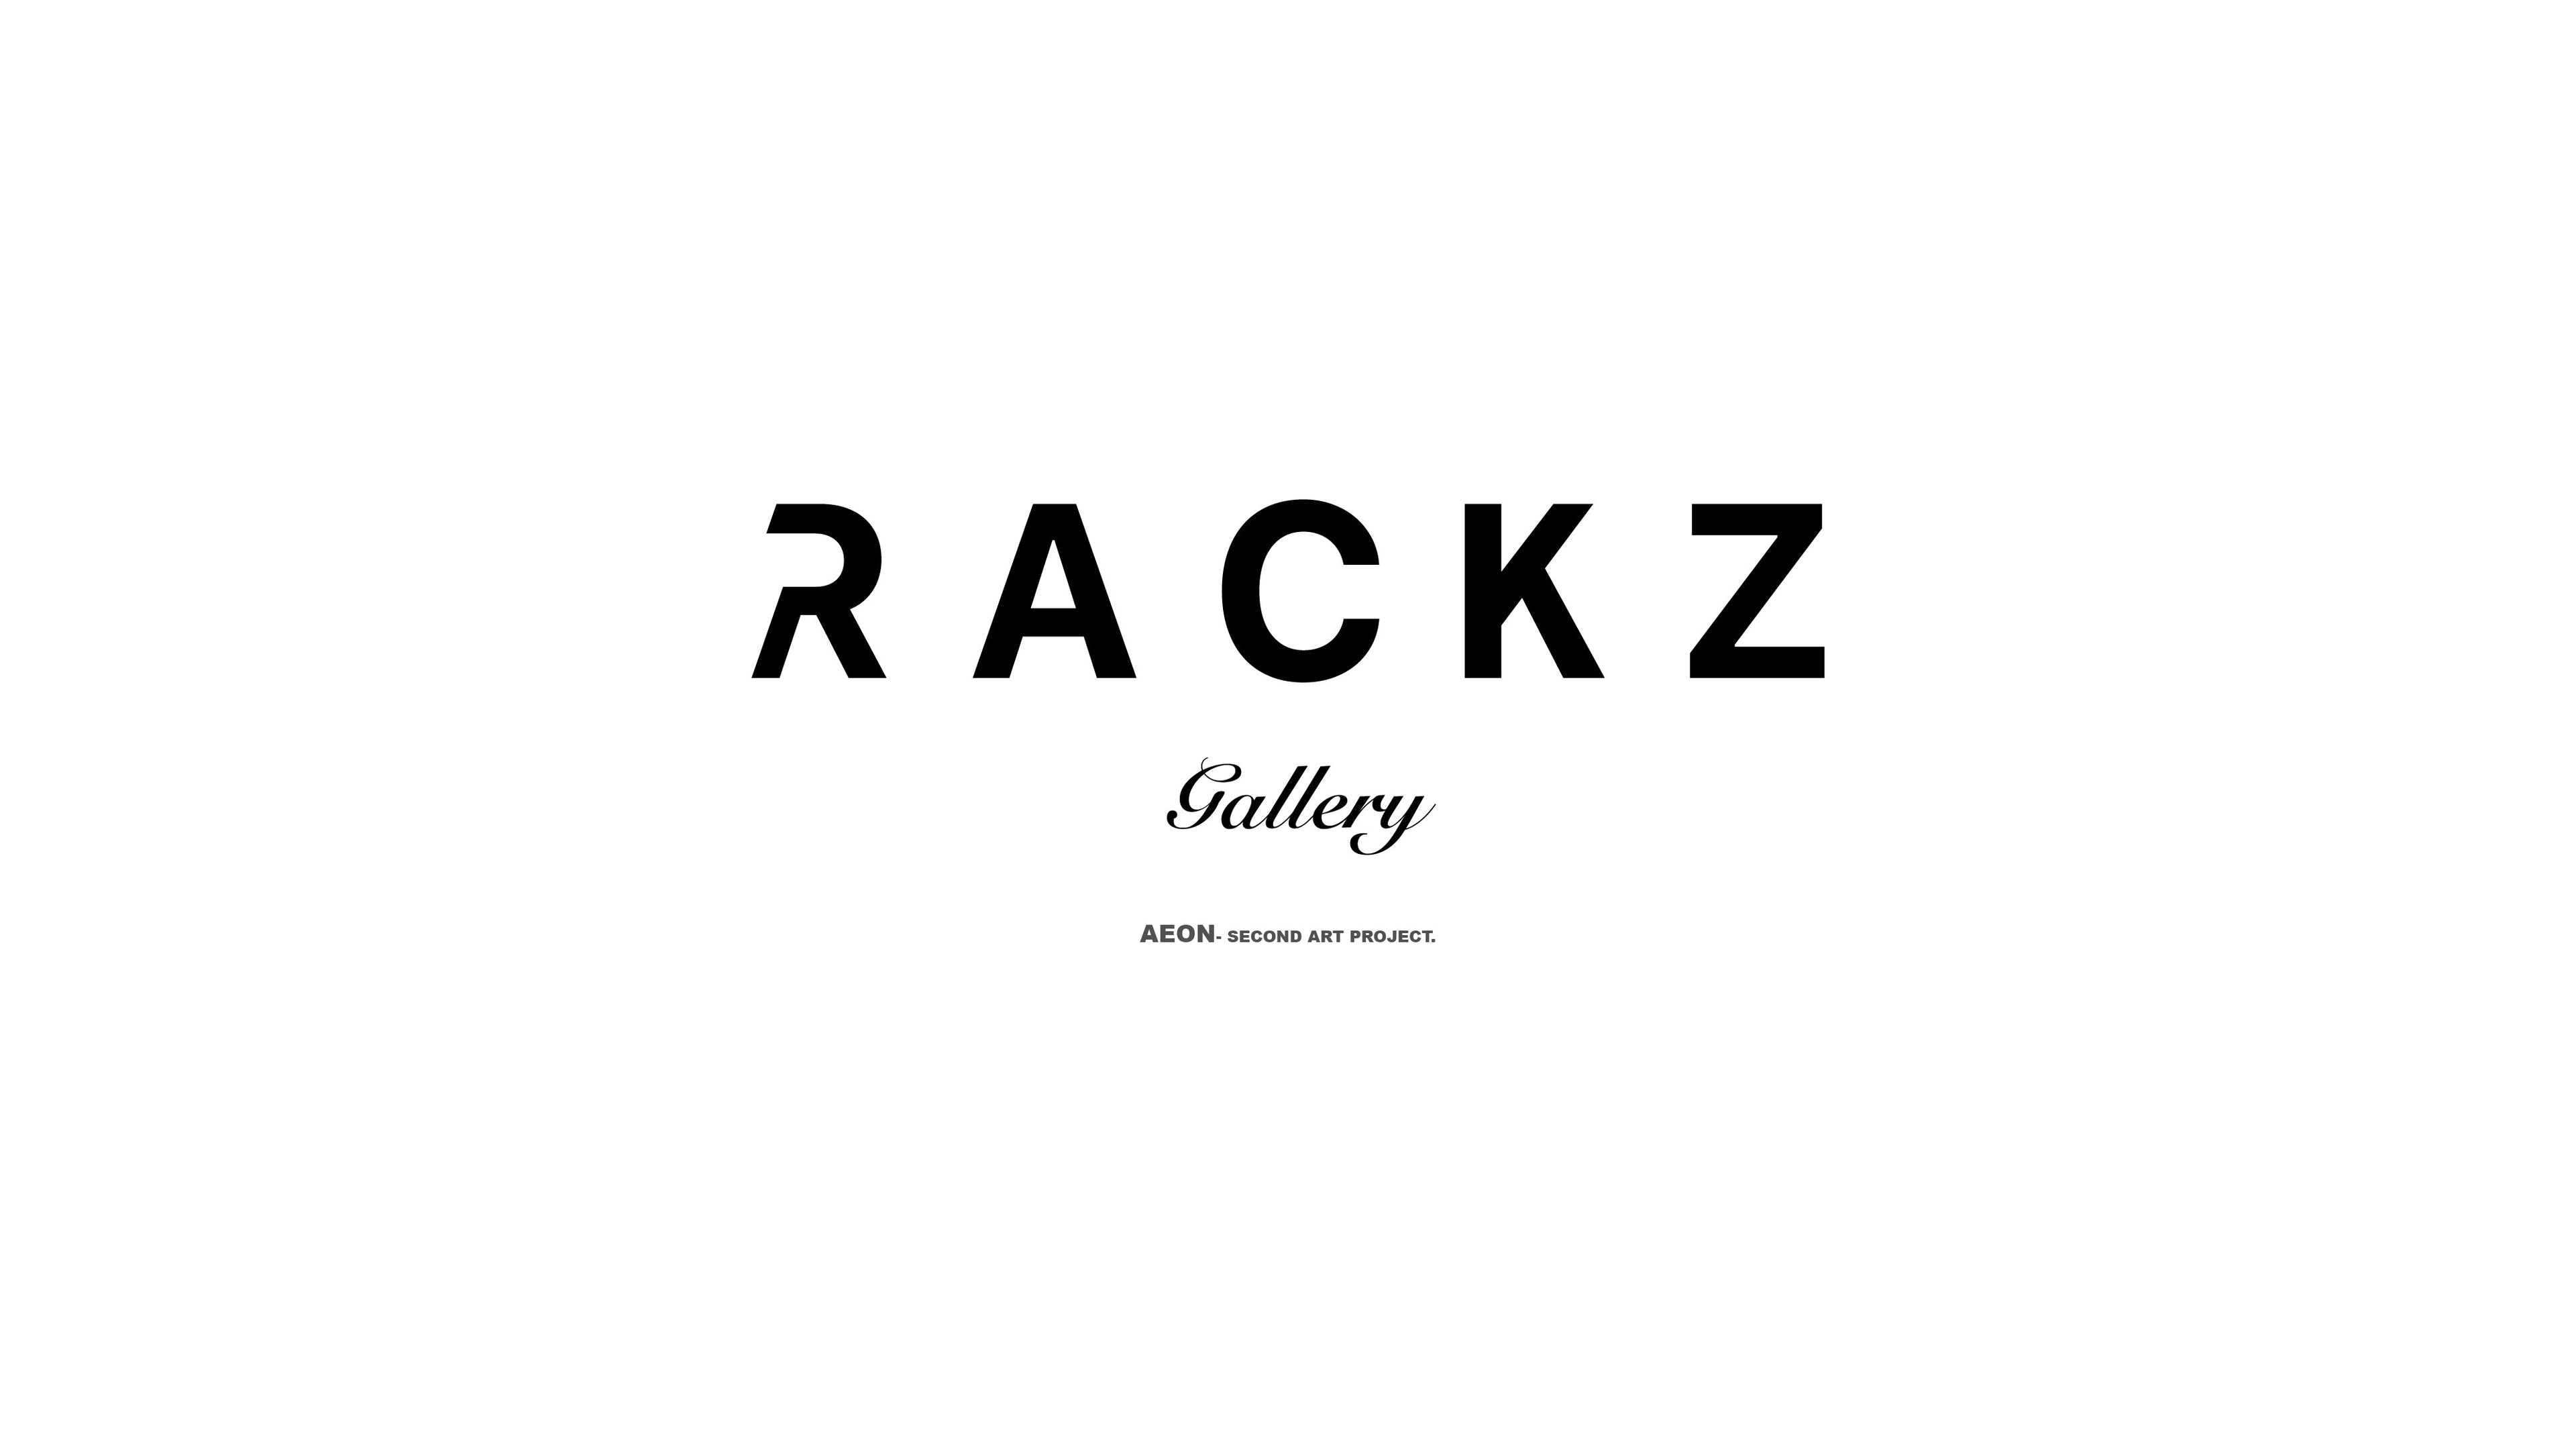 Load video: Rackz Gallery presents the second visual project Aeon.